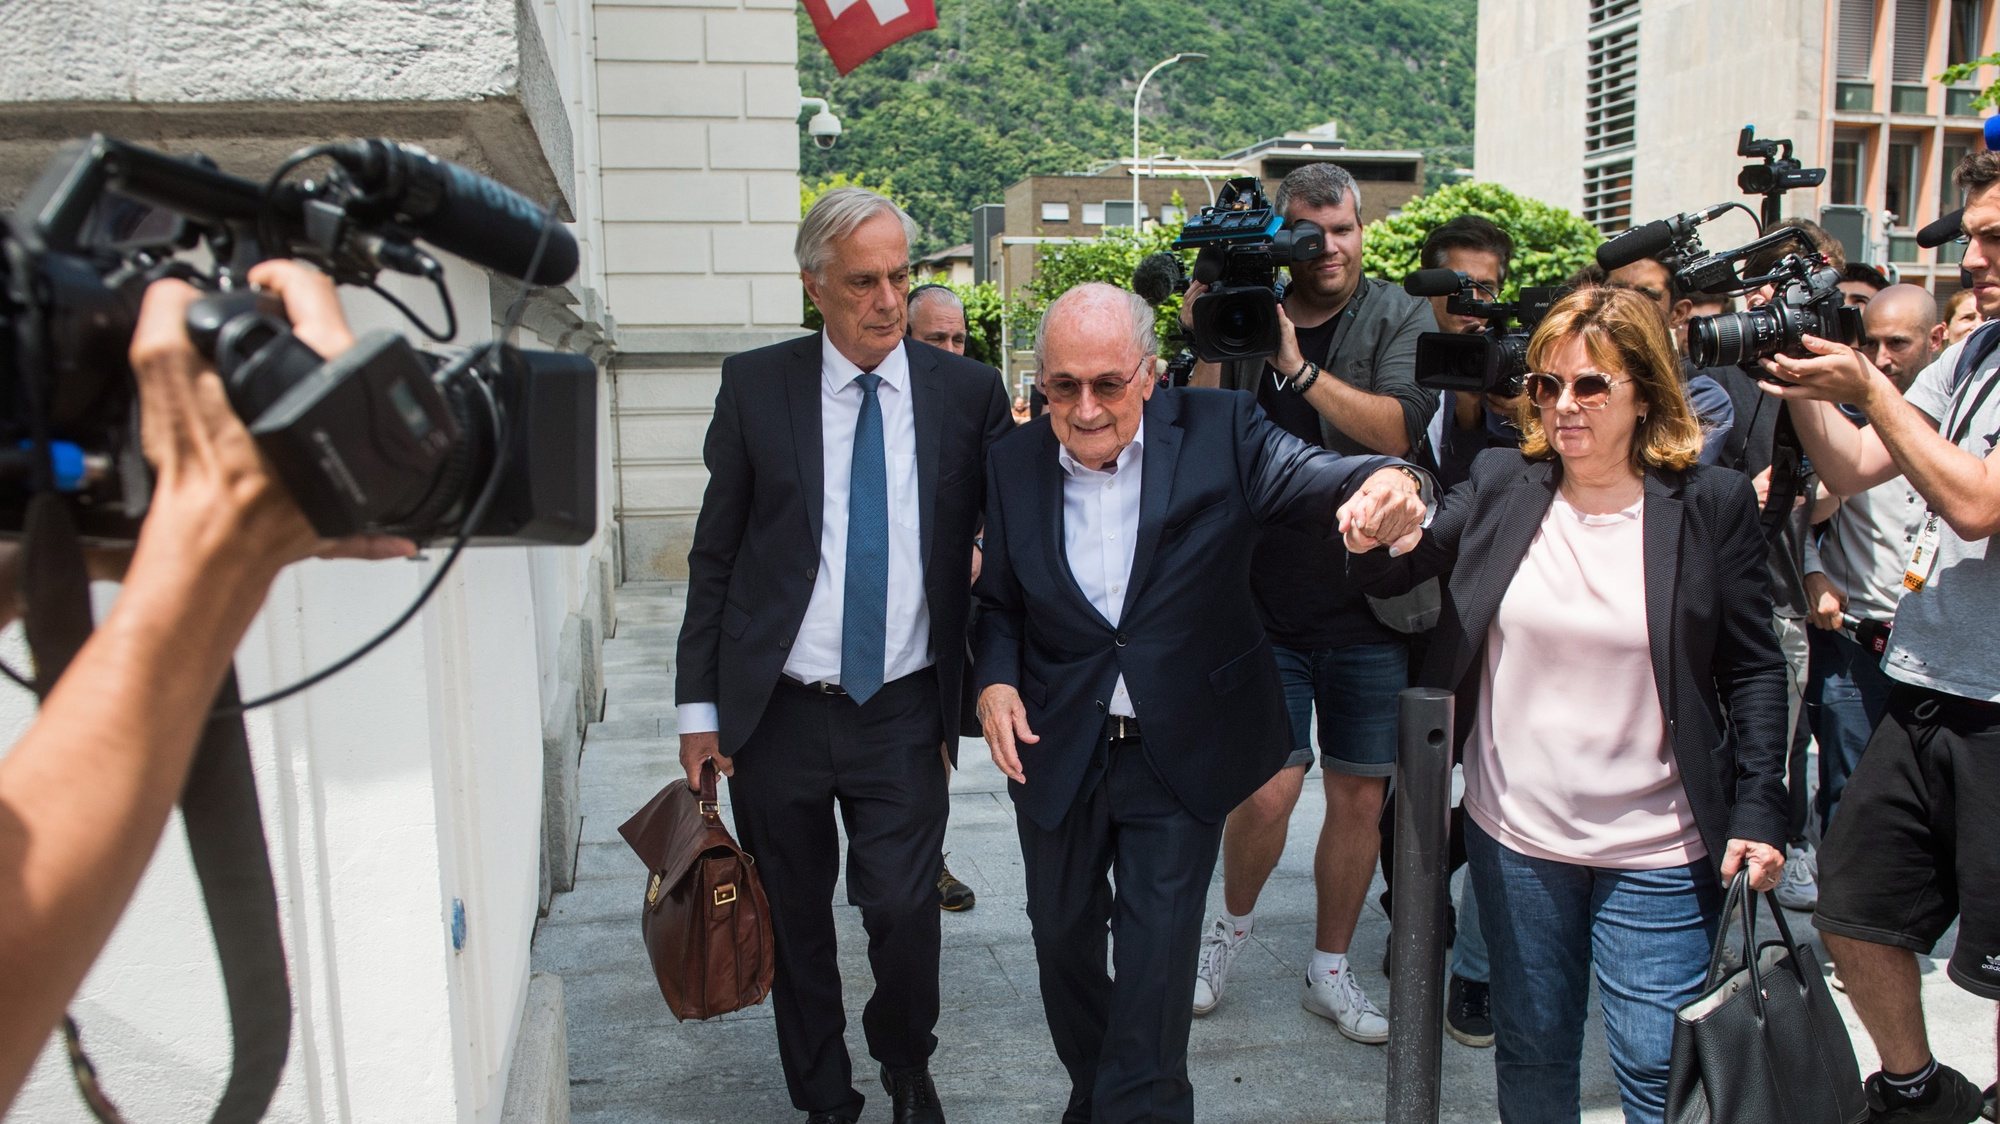 epa10001907 The former president of the World Football Association (Fifa), Joseph Blatter (C) with his daughter Corinne Blatter (R) and his lawyer Lorenz Erni (L), are surrounded by media representatives, as they leave the Swiss Federal Criminal Court after the first day of his trial, in Bellinzona, Switzerland, 08 June 2022. Blatter and the former president of the the European Football Association (Uefa), Michel Platini, stand trial before the Federal Criminal Court from 08 June, over a suspicious two-million payment. The Federal Prosecutor&#039;s Office accuses them of fraud. The defense speaks of a conspiracy.  EPA/ALESSANDRO CRINARI